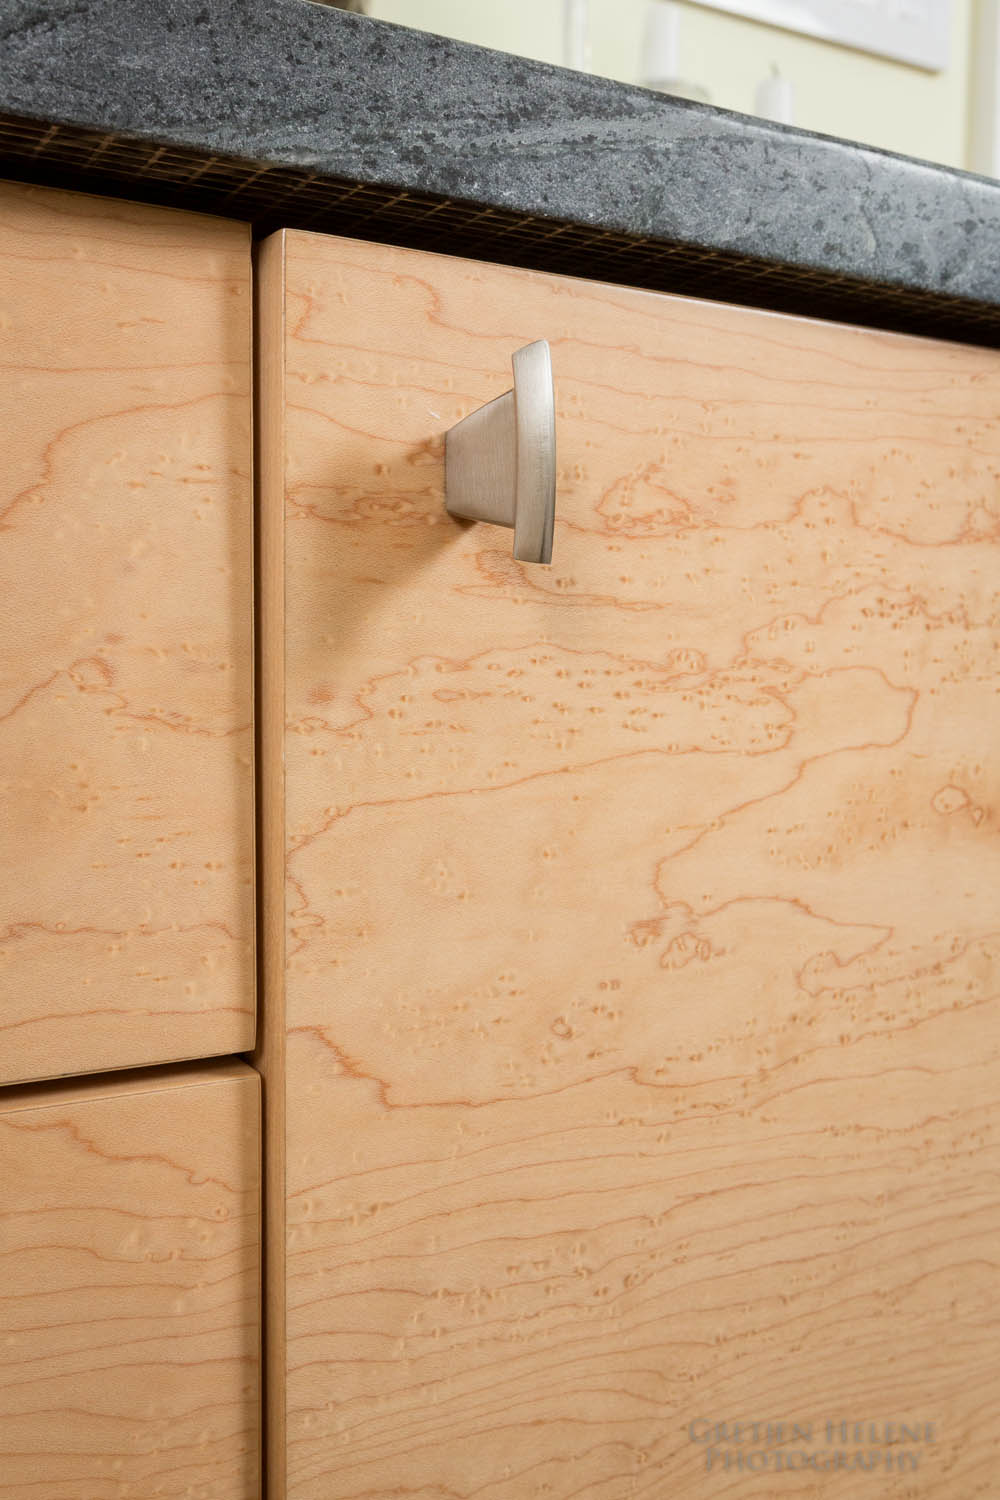 Buffet is crafted from bird's eye maple